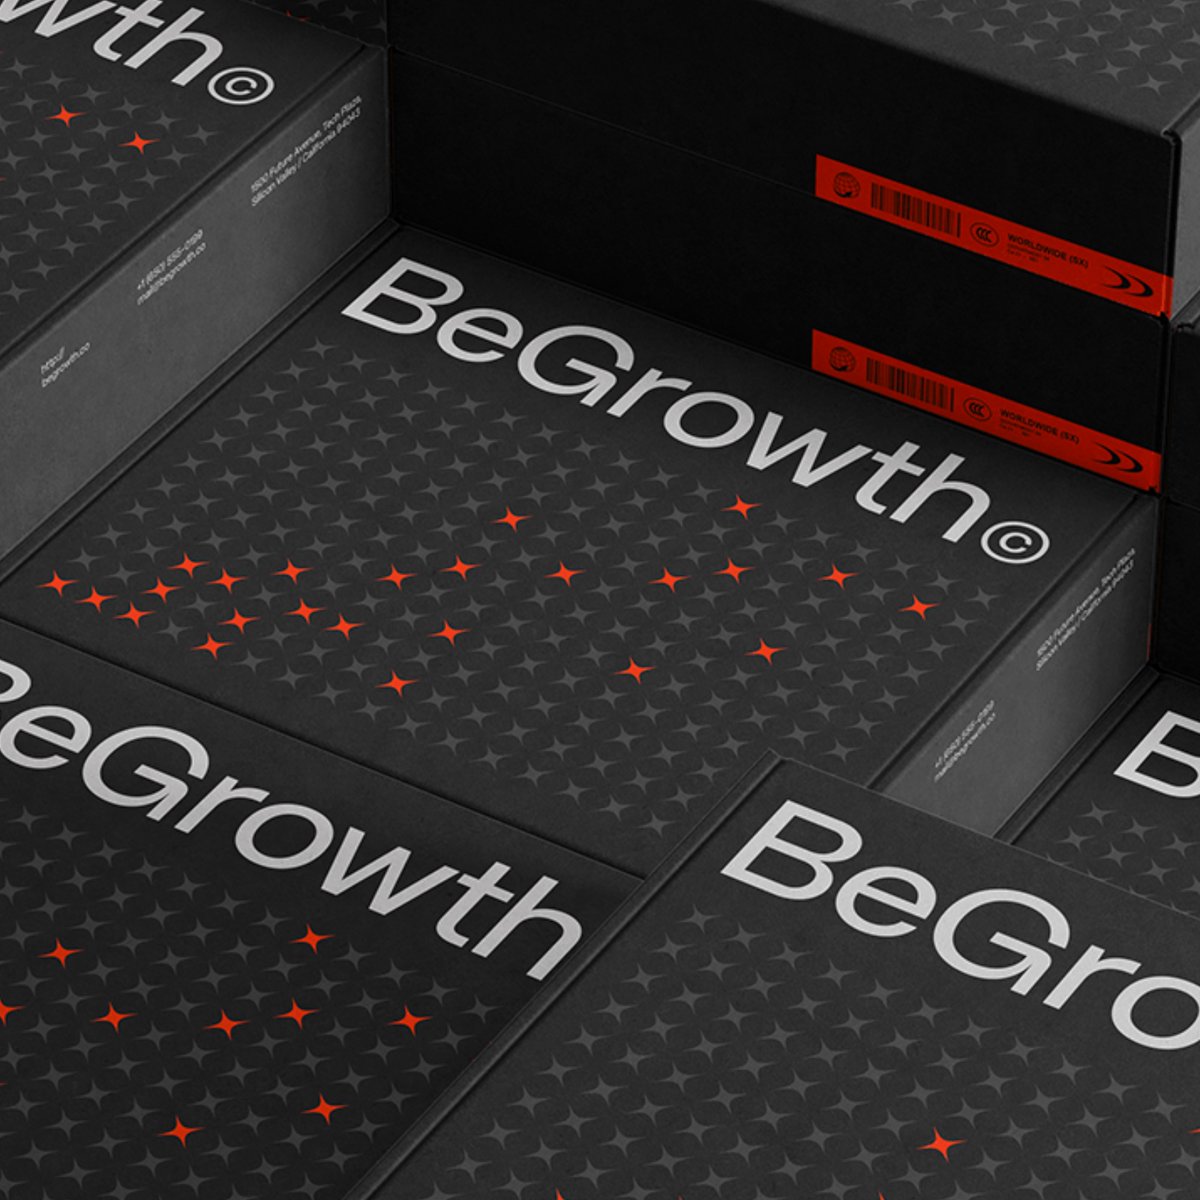 Branding: A Deep Dive into BeGrowth's Visual Identity dlvr.it/T2DT1s